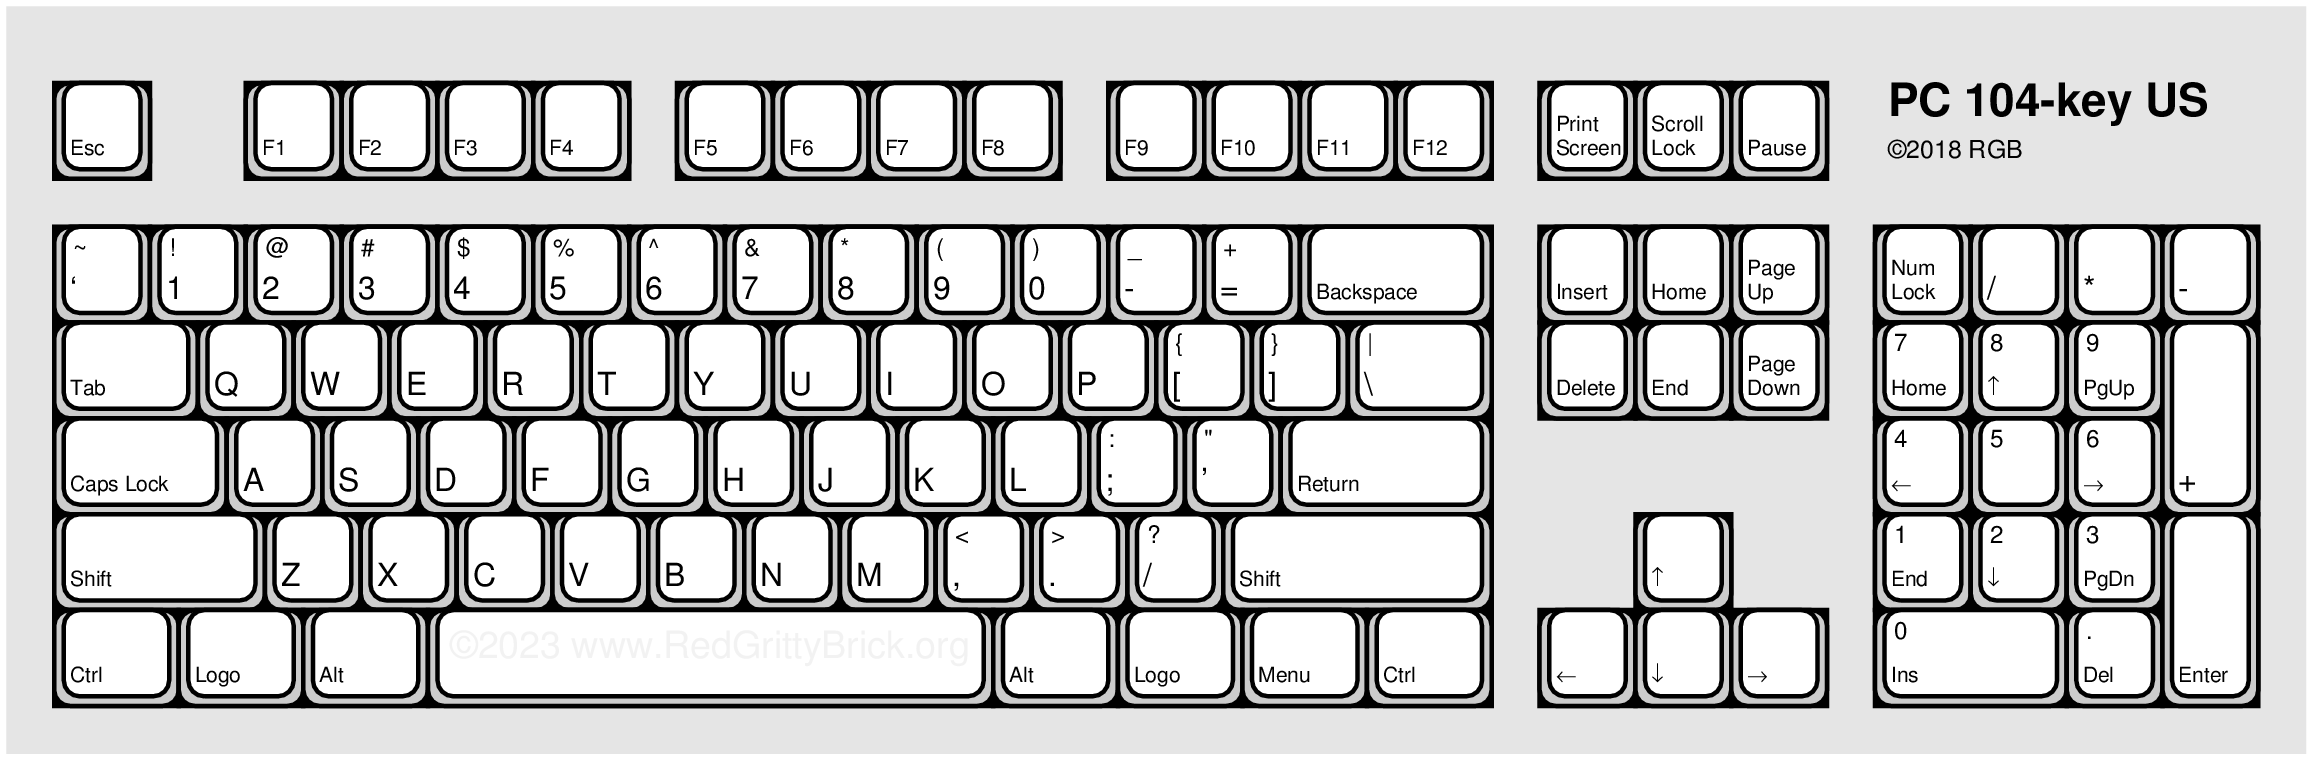 Pc And Vt100 Keyboard Layouts Compared Redgrittybrick